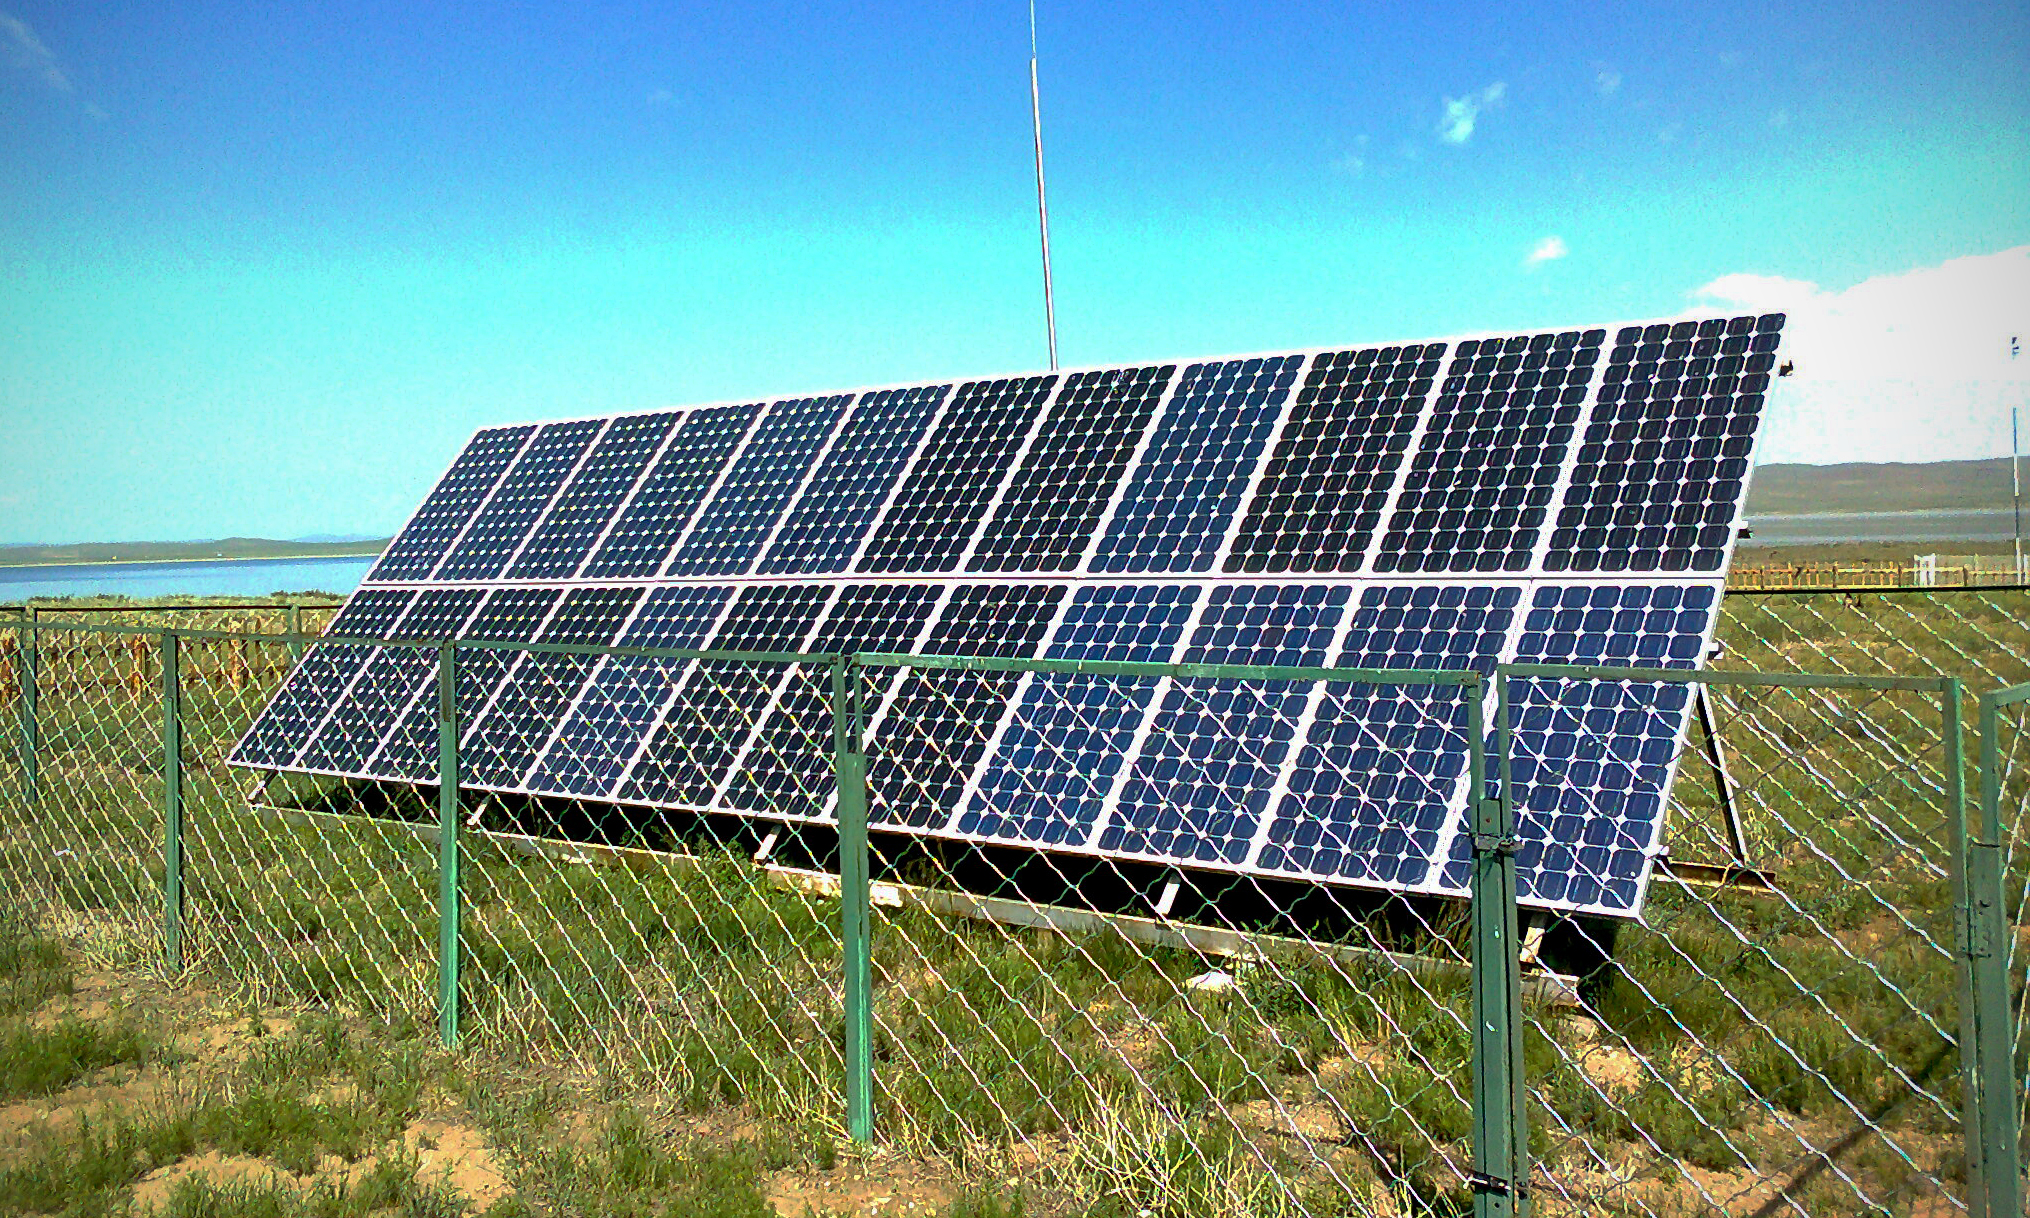 These are solar panels installed in the outdoors